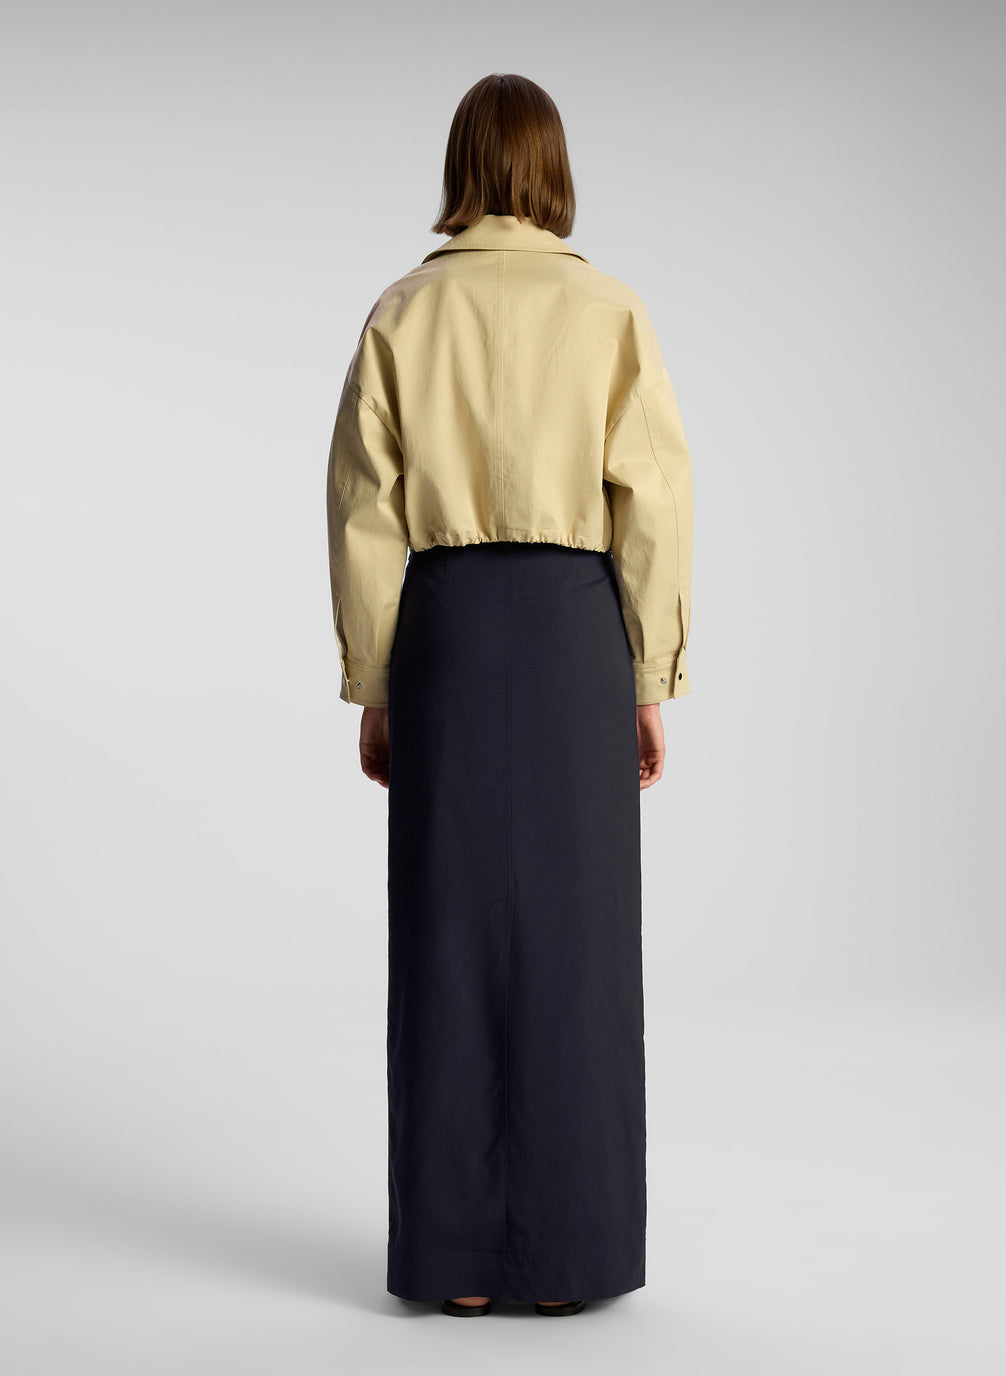 back view of woman wearing tan jacket and navy blue maxi skirt